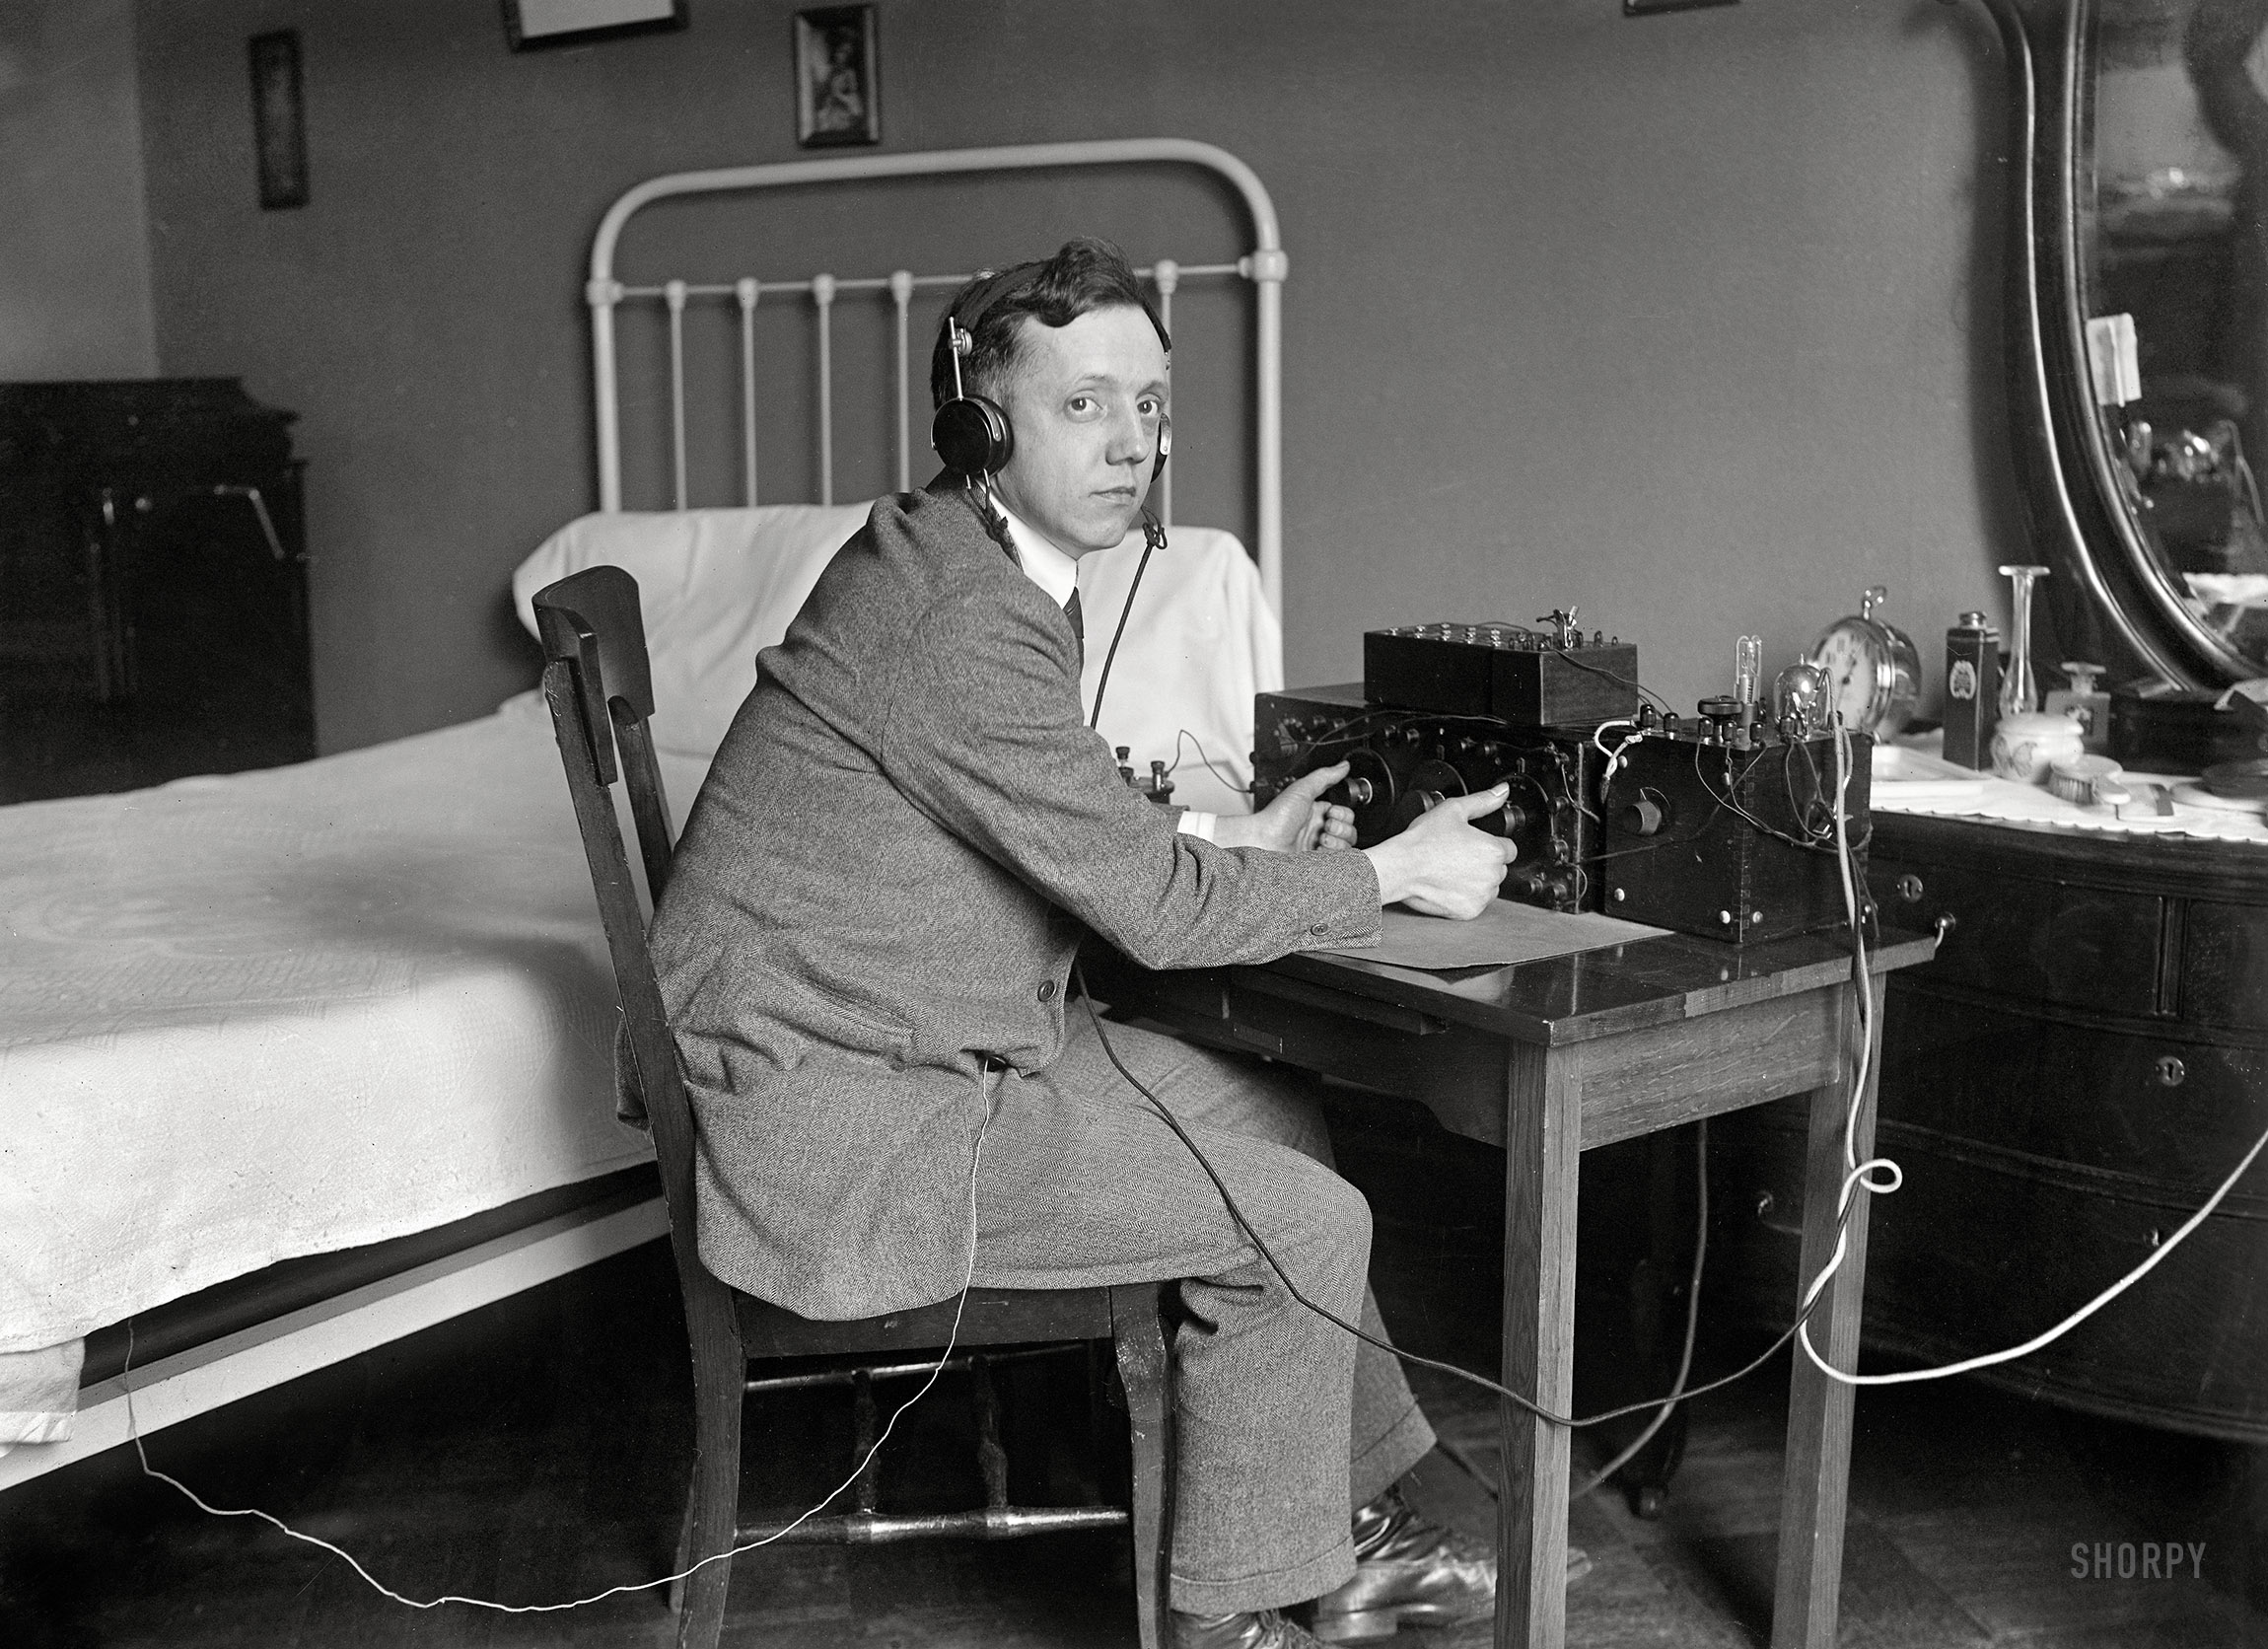 March 31, 1922. "H.G. Corcoran of Washington, D.C., needs an aerial for his radio outfit. His receiving wire is connected to the wire springs of his bed, which take the place of an aerial." Harris & Ewing Collection glass negative. View full size.